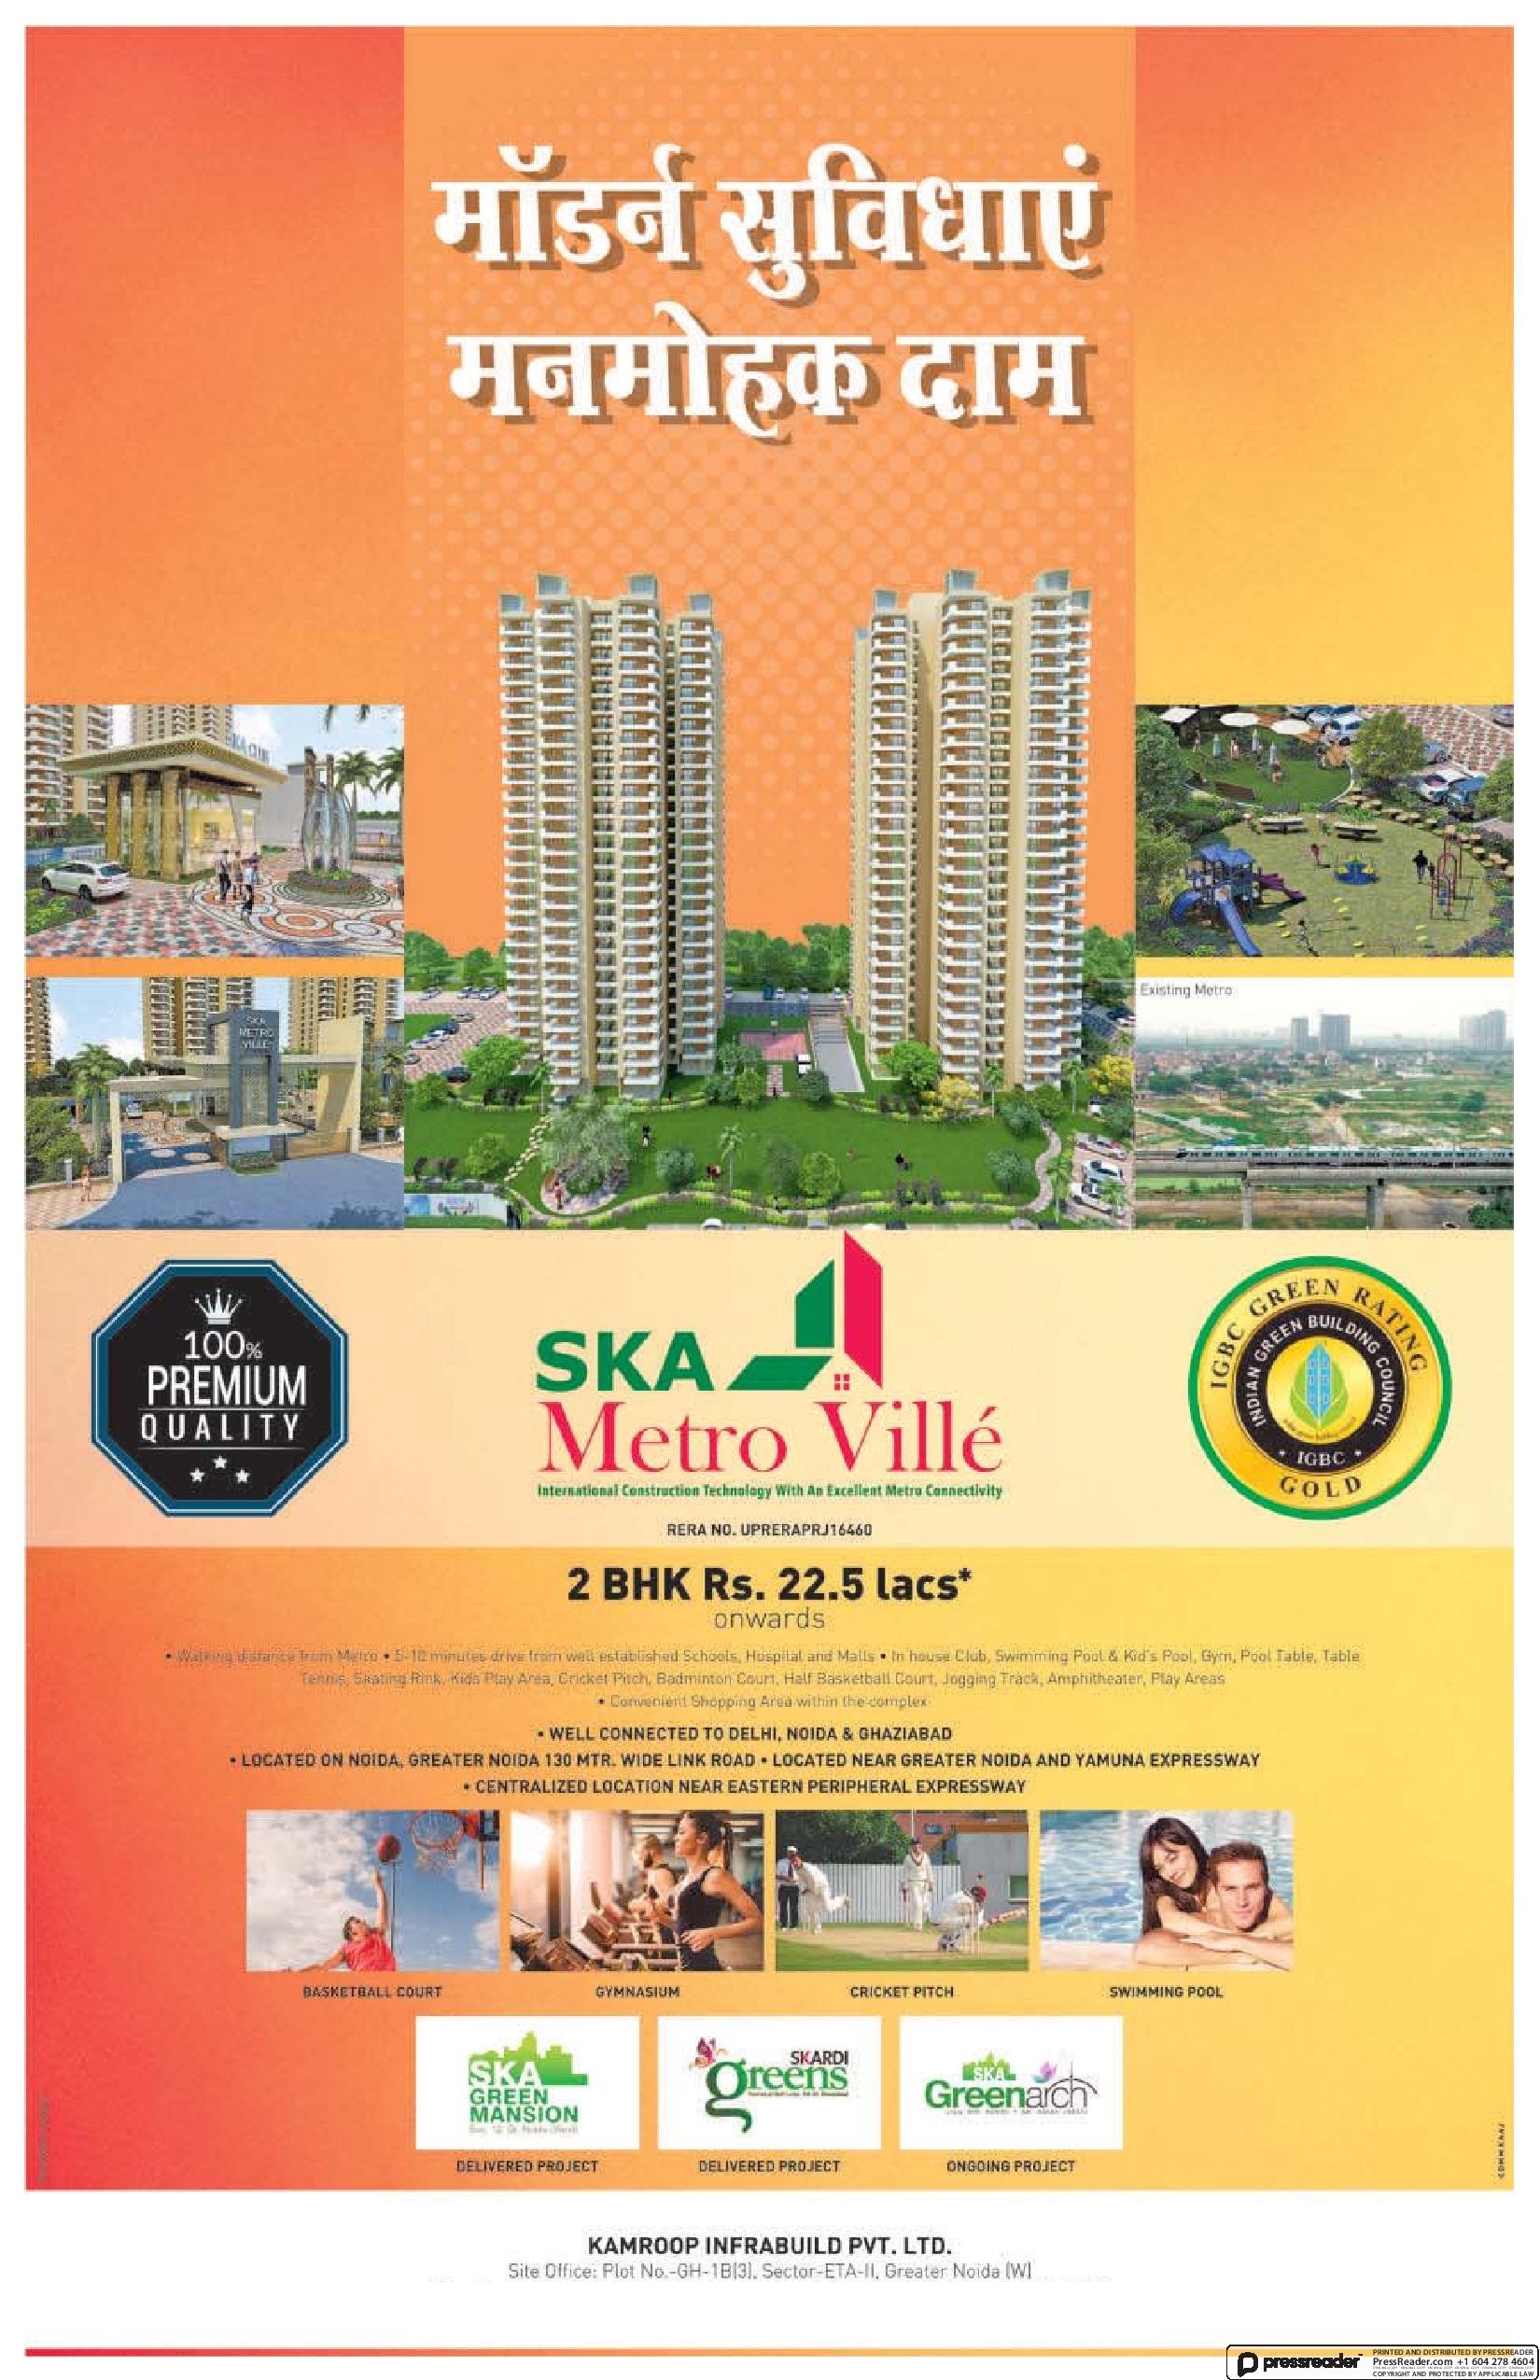 Book 2 BHK @ Rs. 22.5 Lacs at SKA Metro Ville in Greater Noida Update